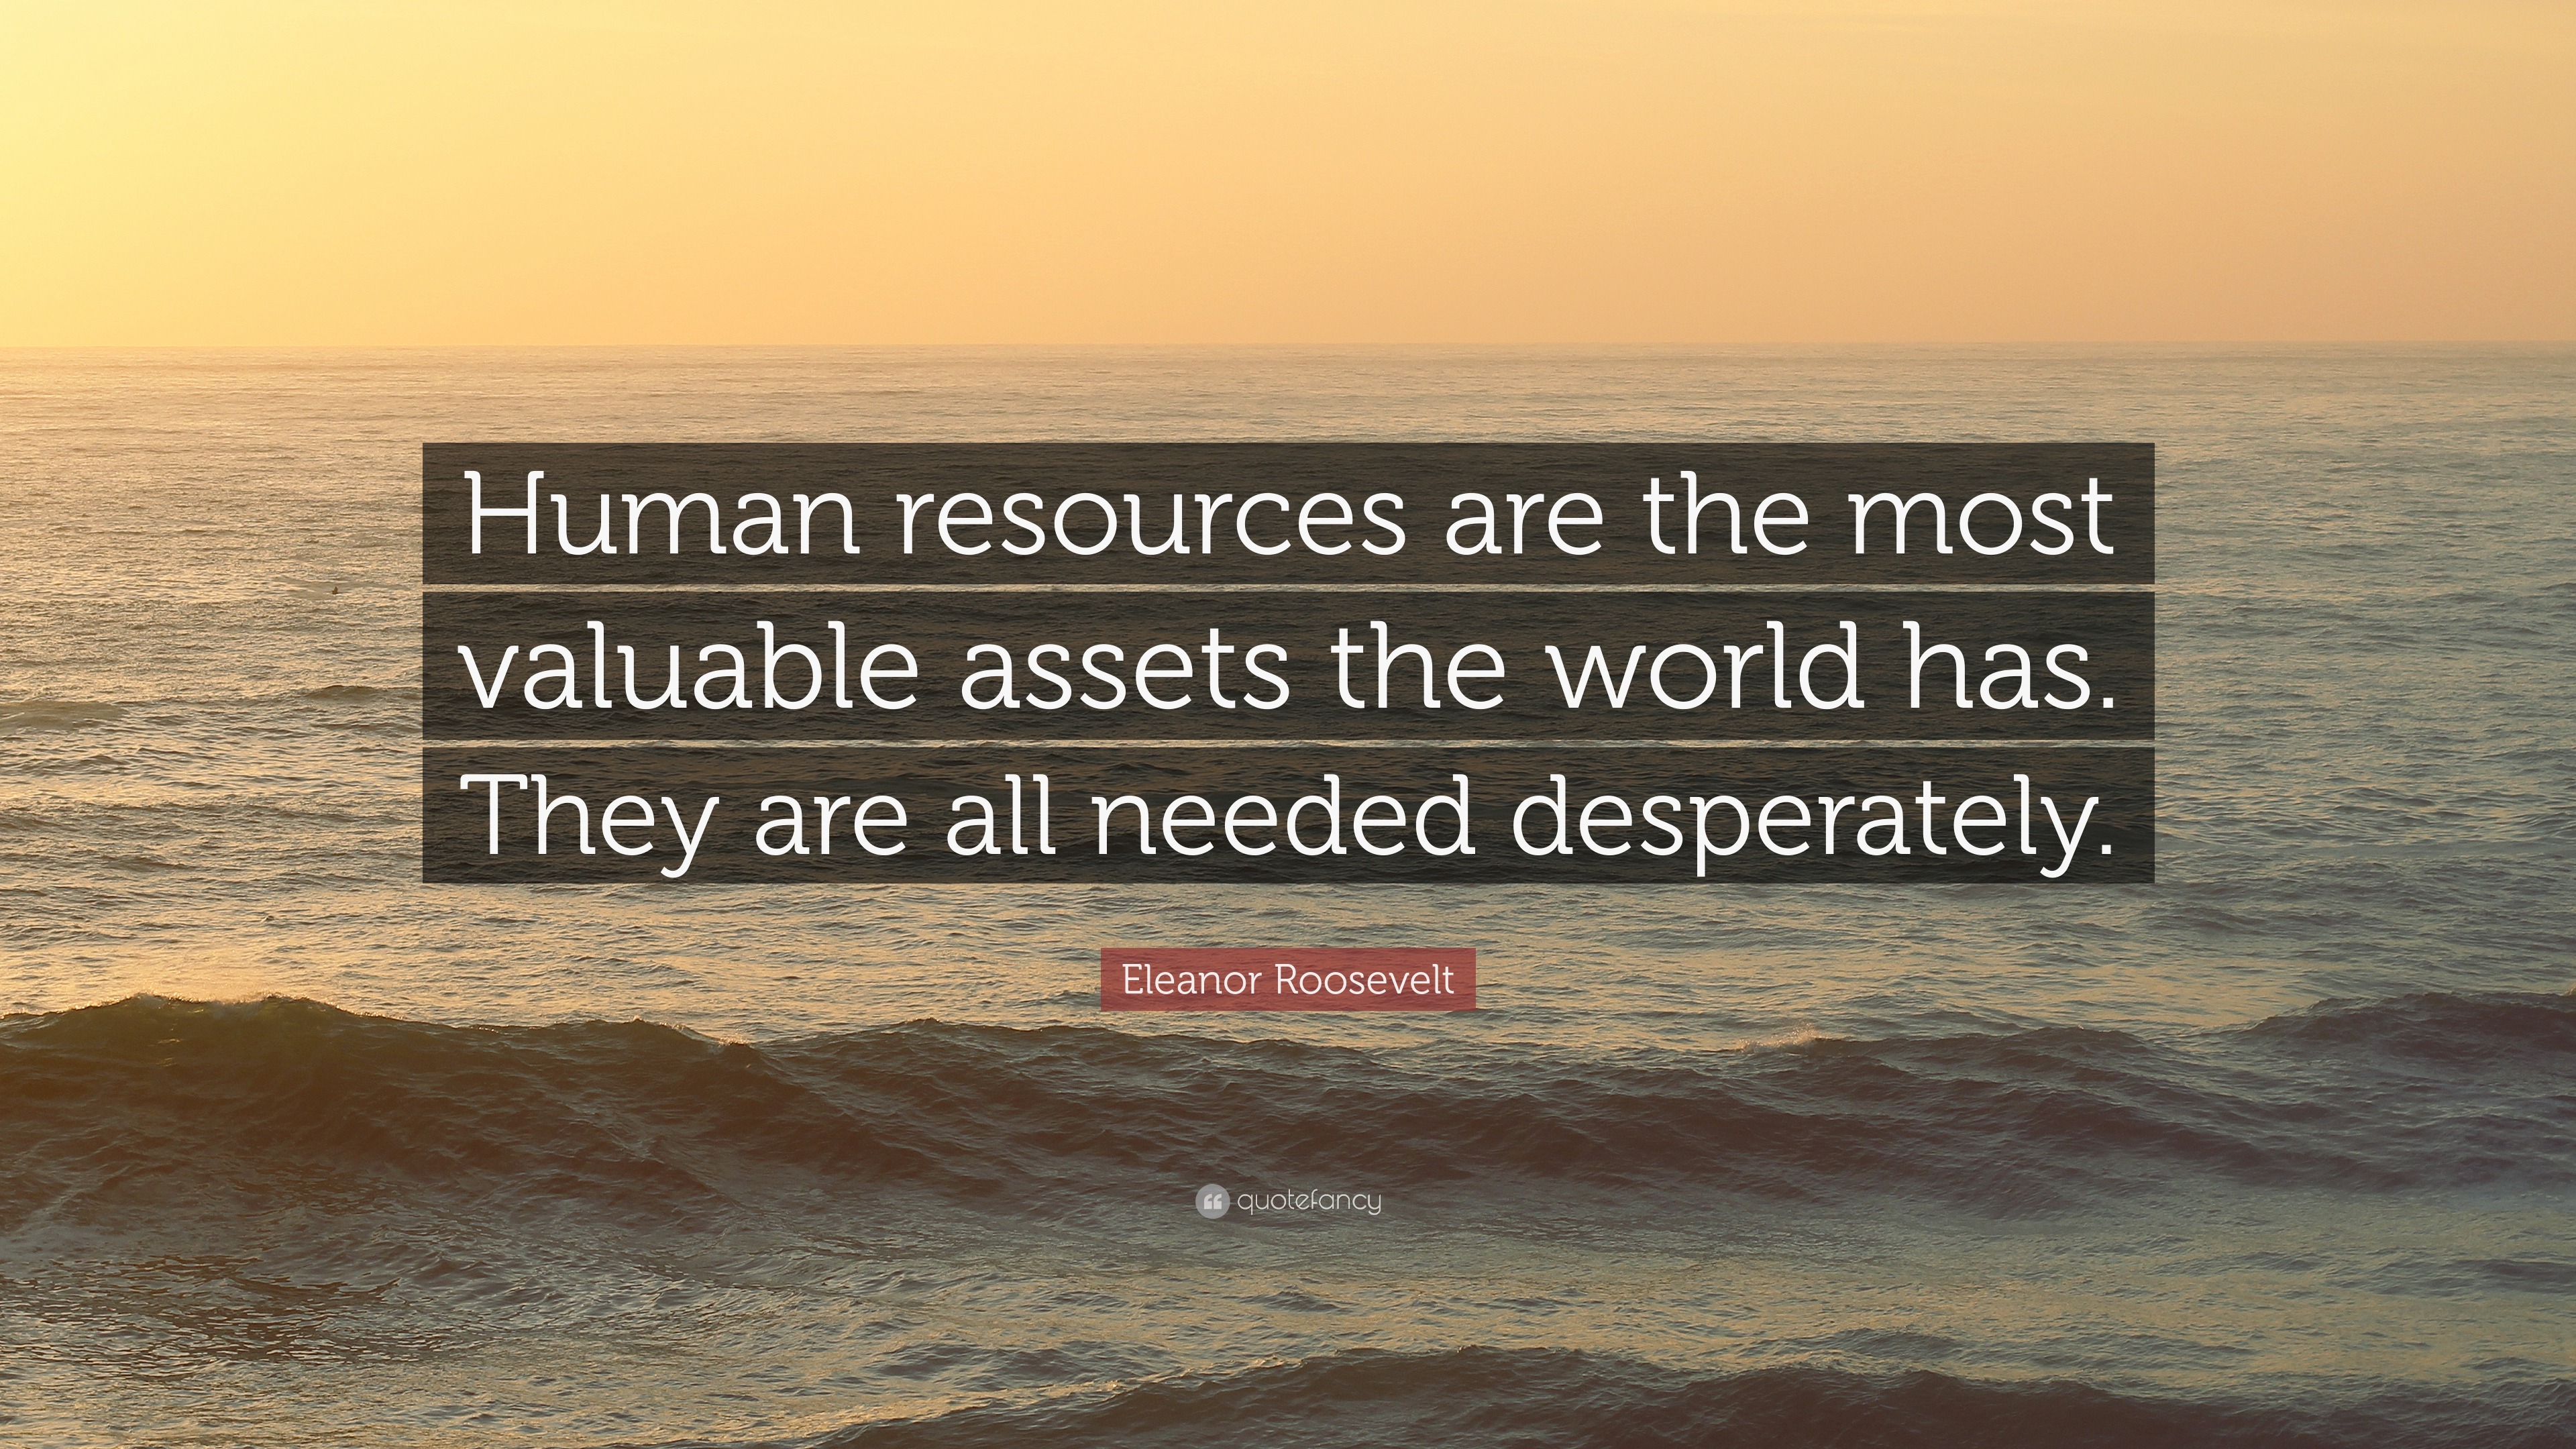 Eleanor Roosevelt Quote: "Human resources are the most valuable assets ...